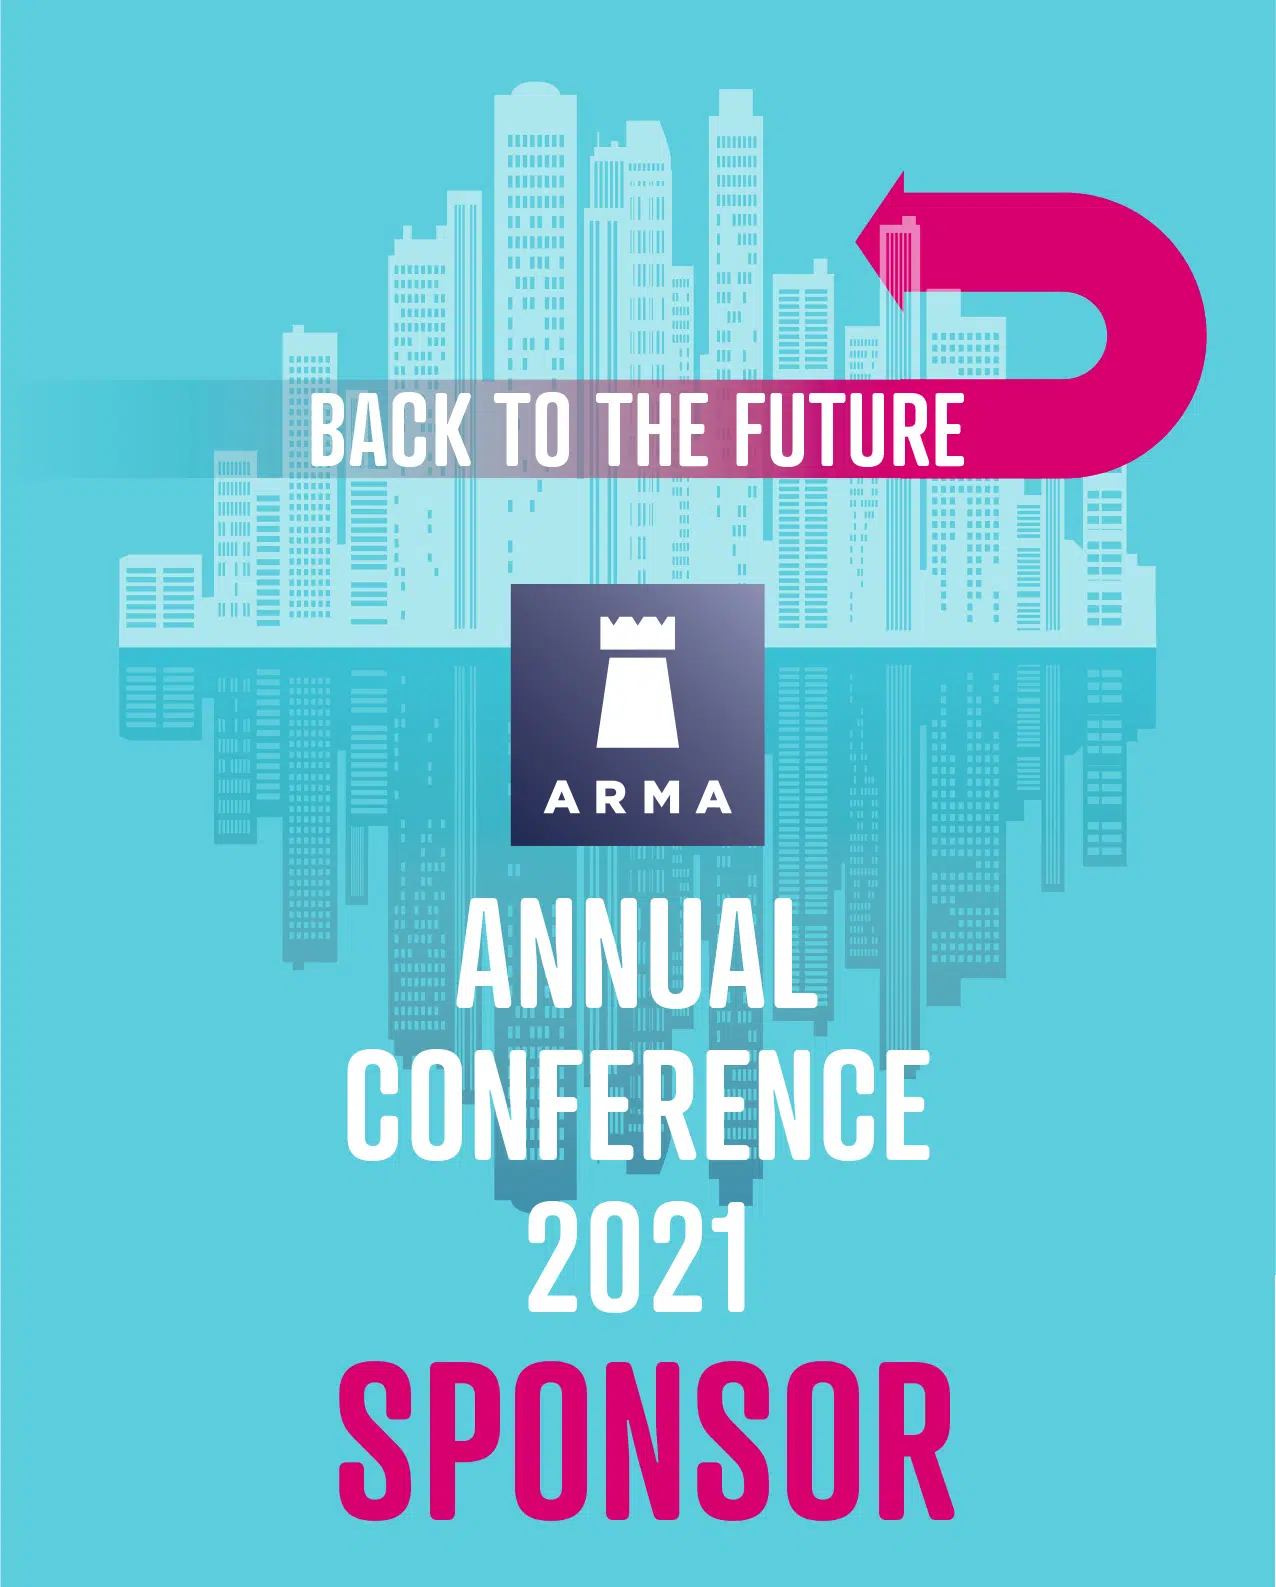 Sponsor image of the ARMA Annual Conference 2021